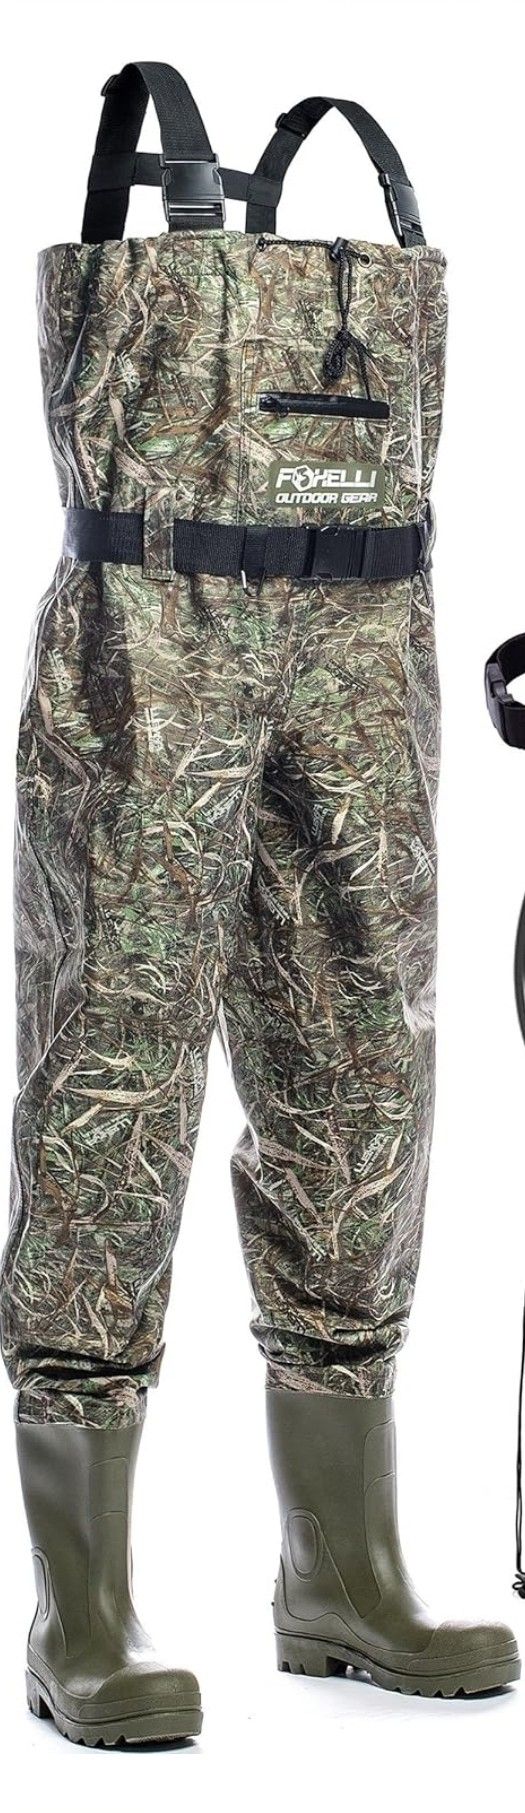 Foxelli Chest Waders – Camo Hunting Fishing Waders for Men and Women with Boots, 2-ply Nylon/PVC Waterproof Bootfoot Waders